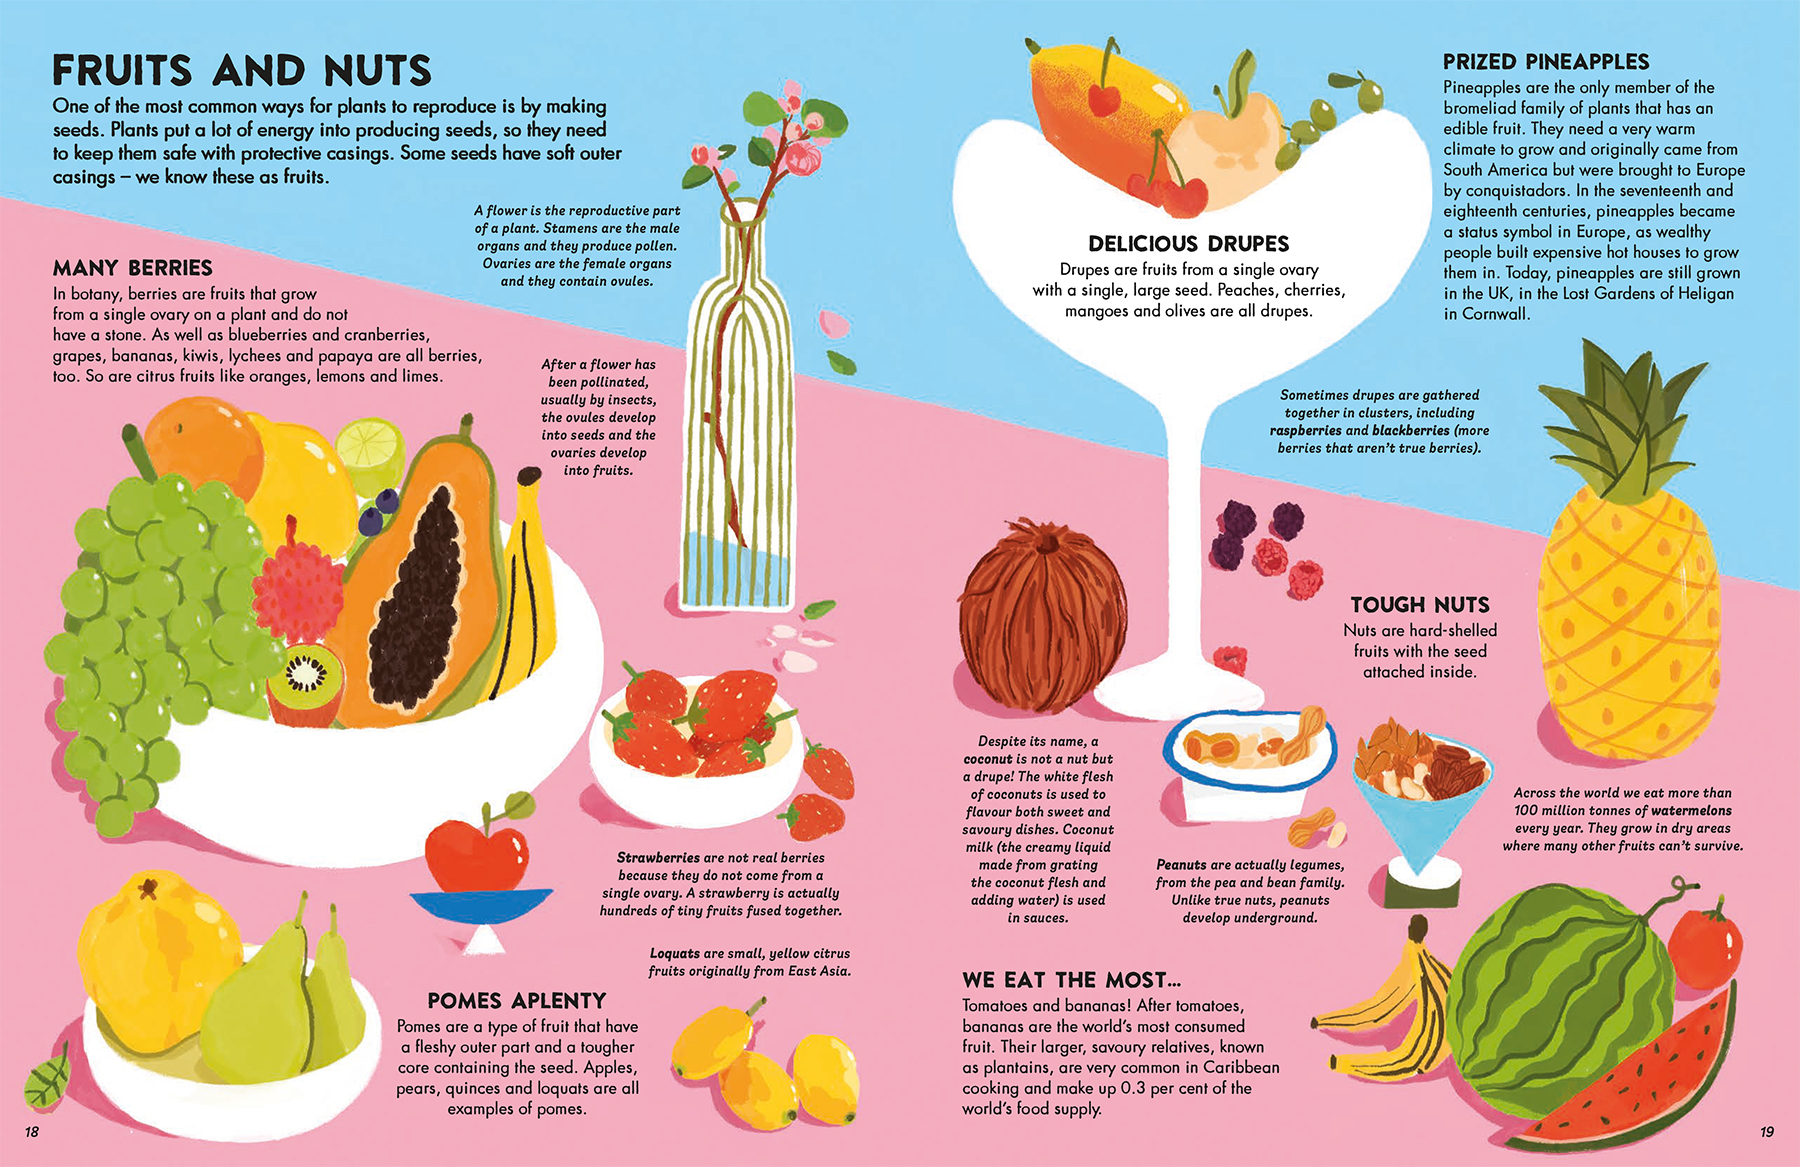 world-of-food-non-fiction-book-illustration-fruits-nuts-berries-drupes-pomes-watermelon-coconut-pineapple-cave-banana-tomato-violeta-noy